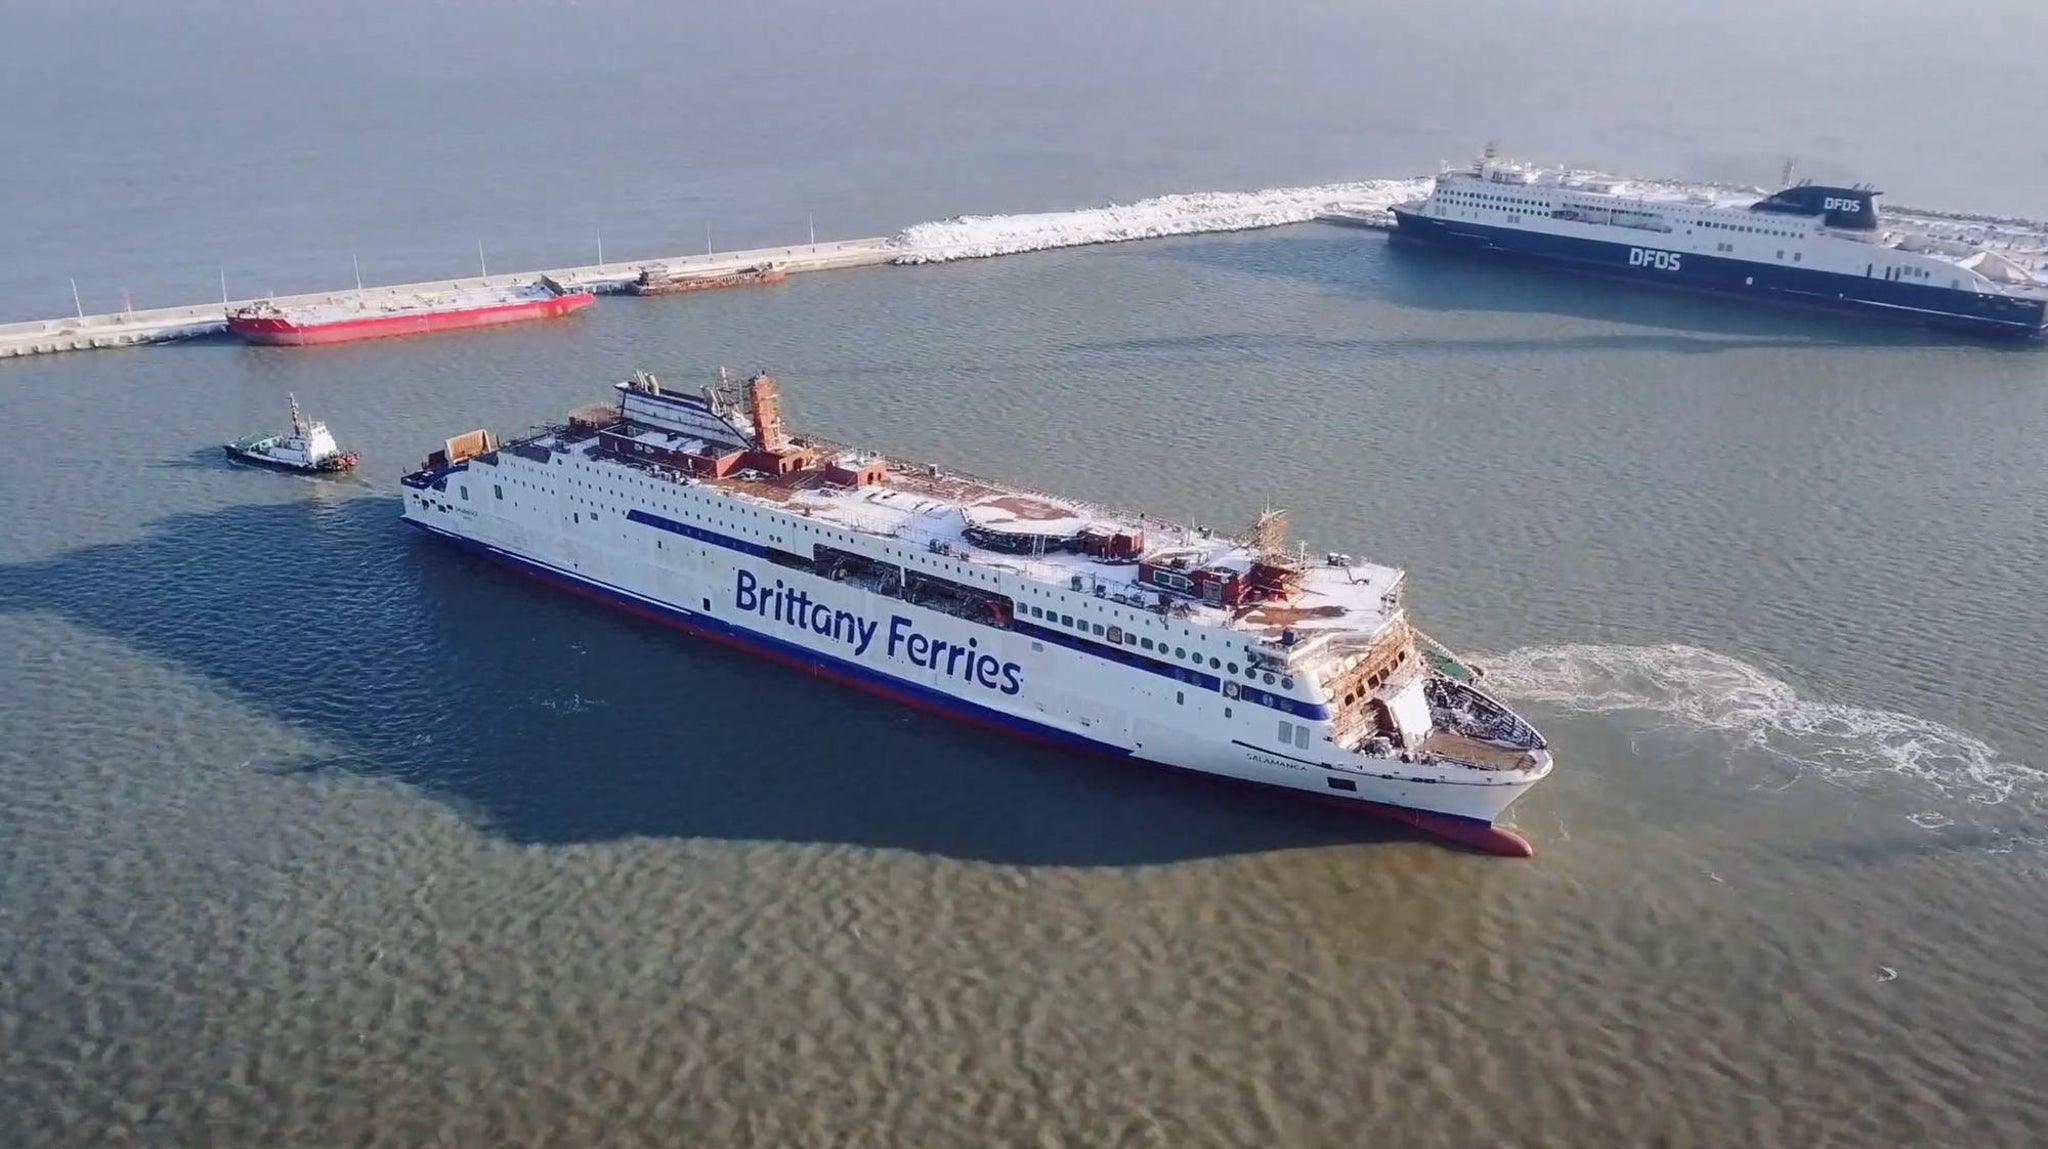 First LNG-powered ferry of UK on her way to Brittany Ferries